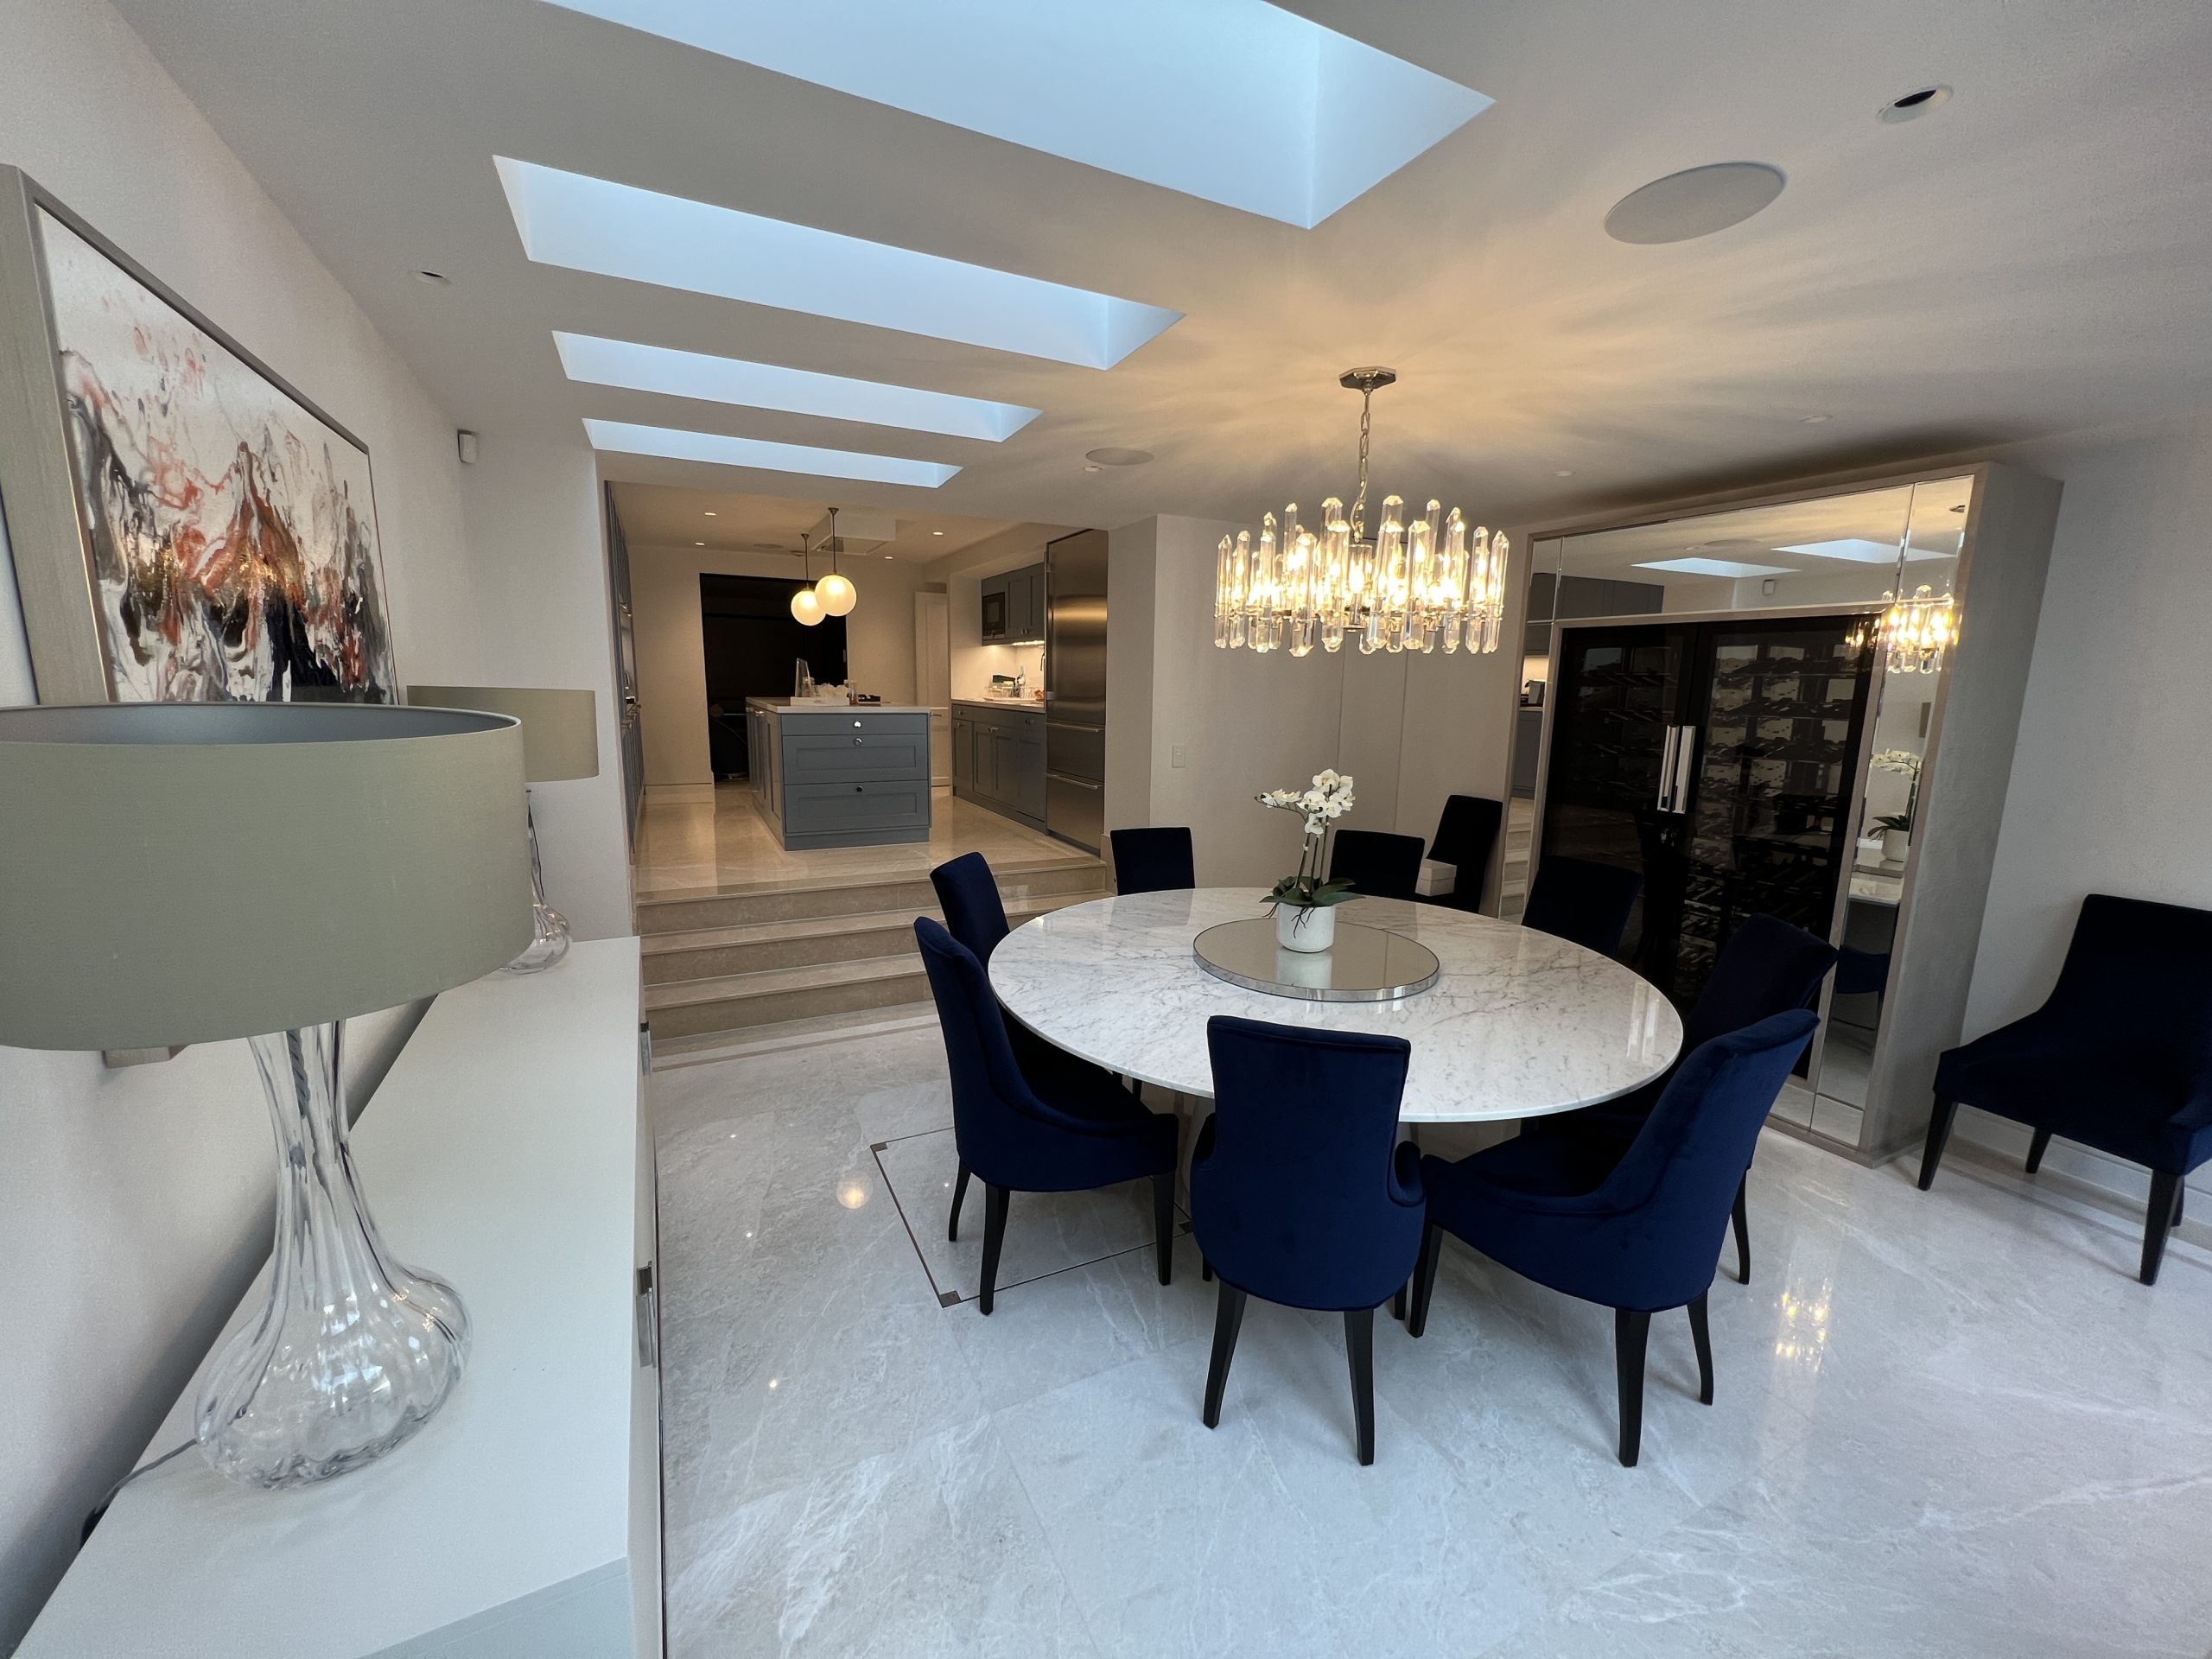 Crestron Control in the dining room and kitchen - shows dining table, light fitting nad in-ceiling speakers.